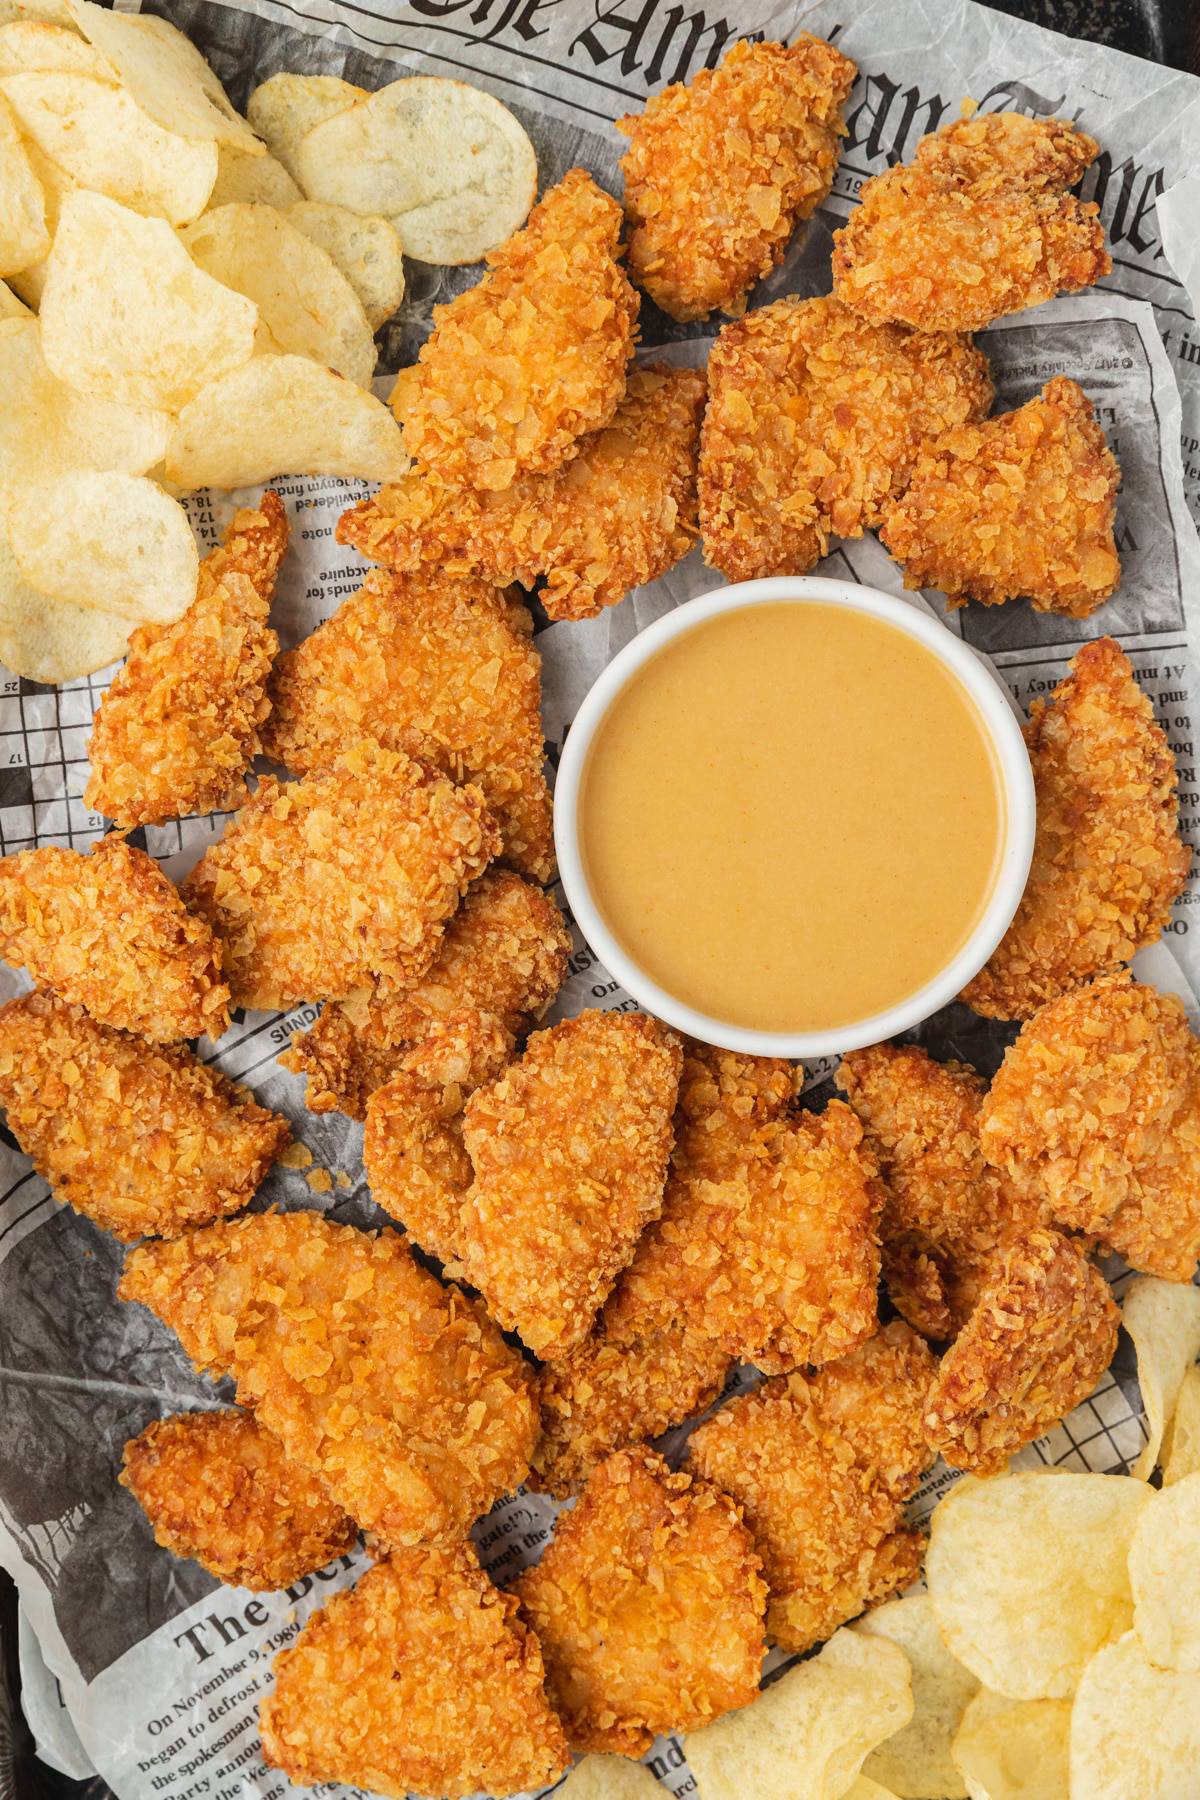 Chicken tender recipes featuring fried chicken nuggets with a side of potato chips and dipping sauce.